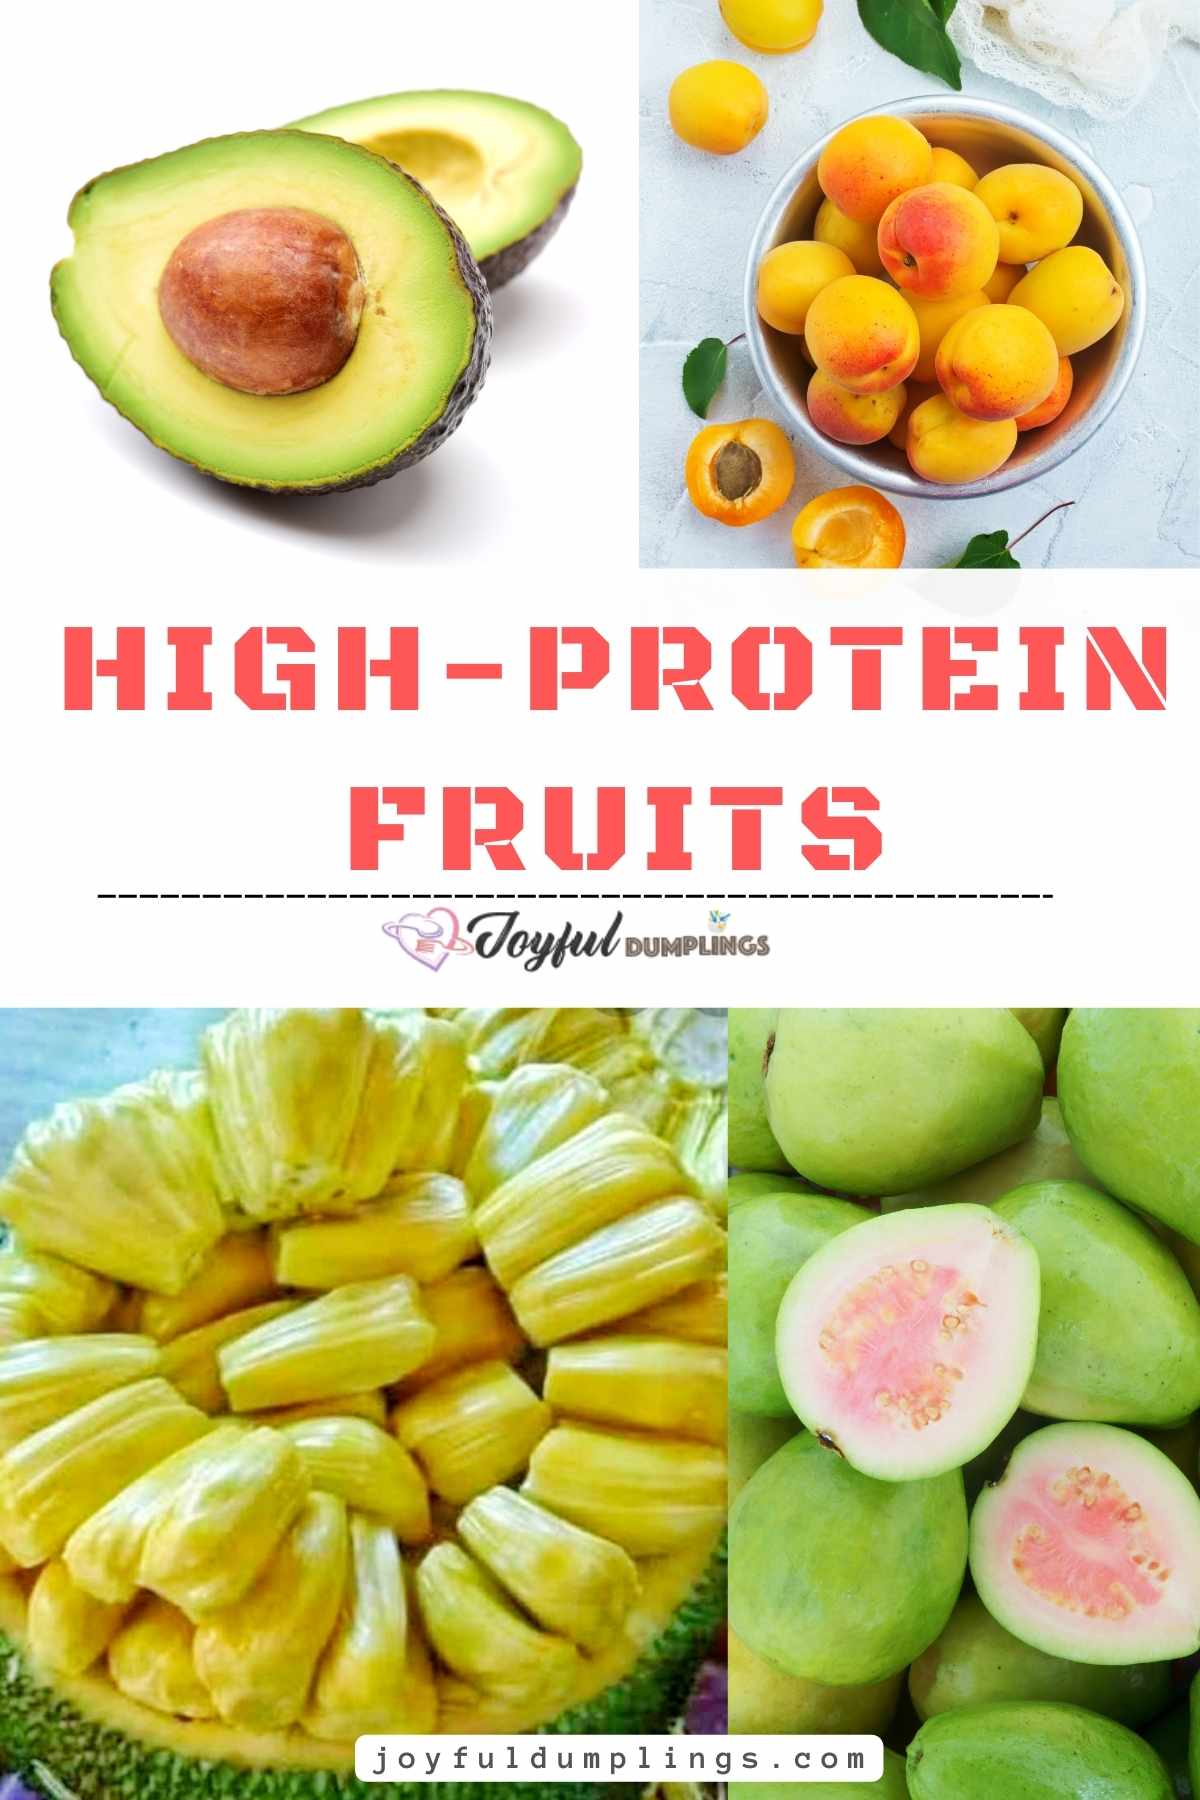 Top 10 High Protein Fruits You Can't Miss Out